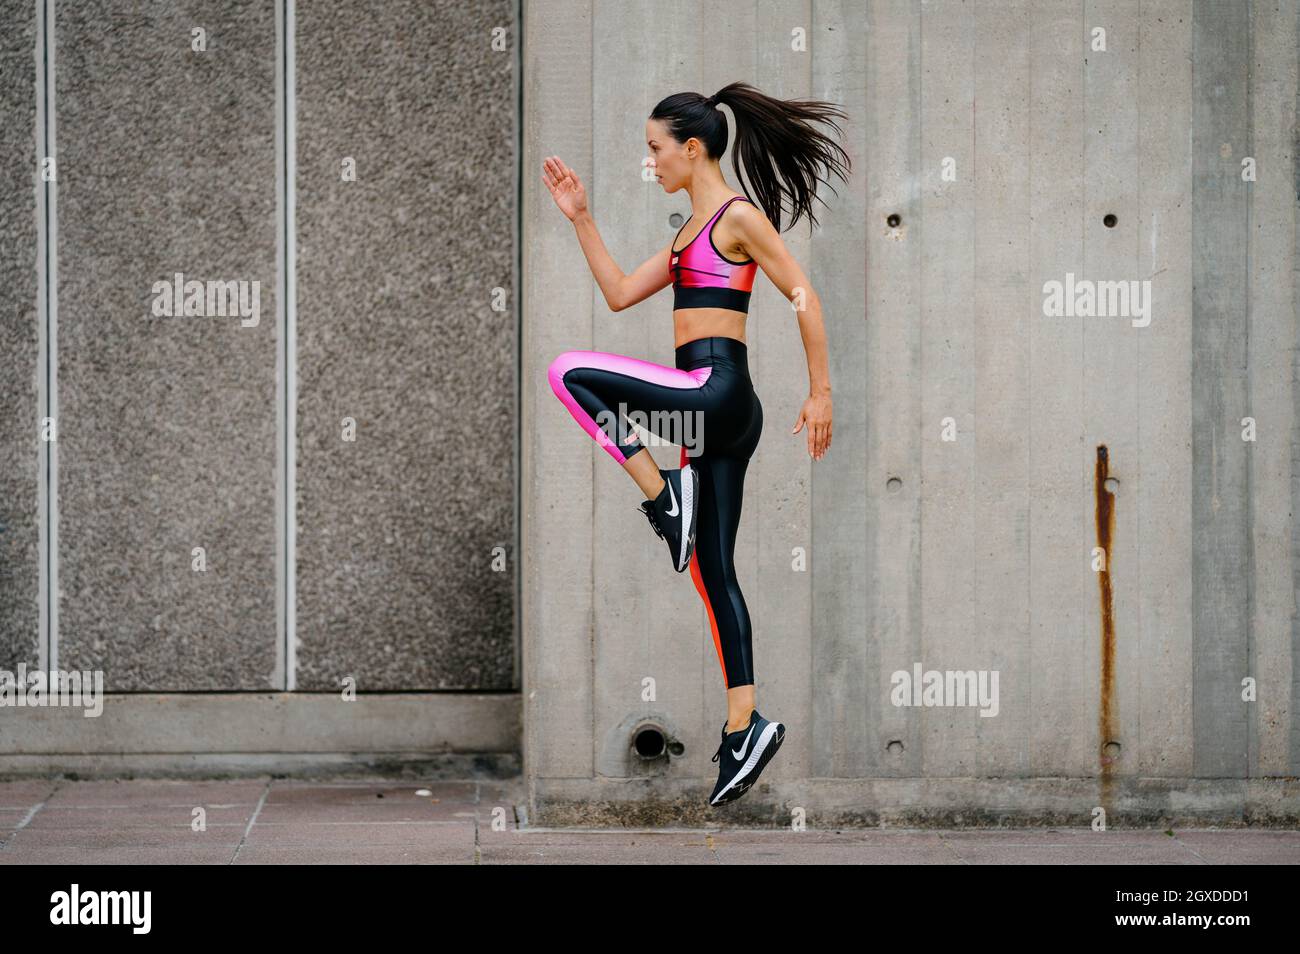 An athletic woman in a pink sports outfit jumping in an urban environment Stock Photo